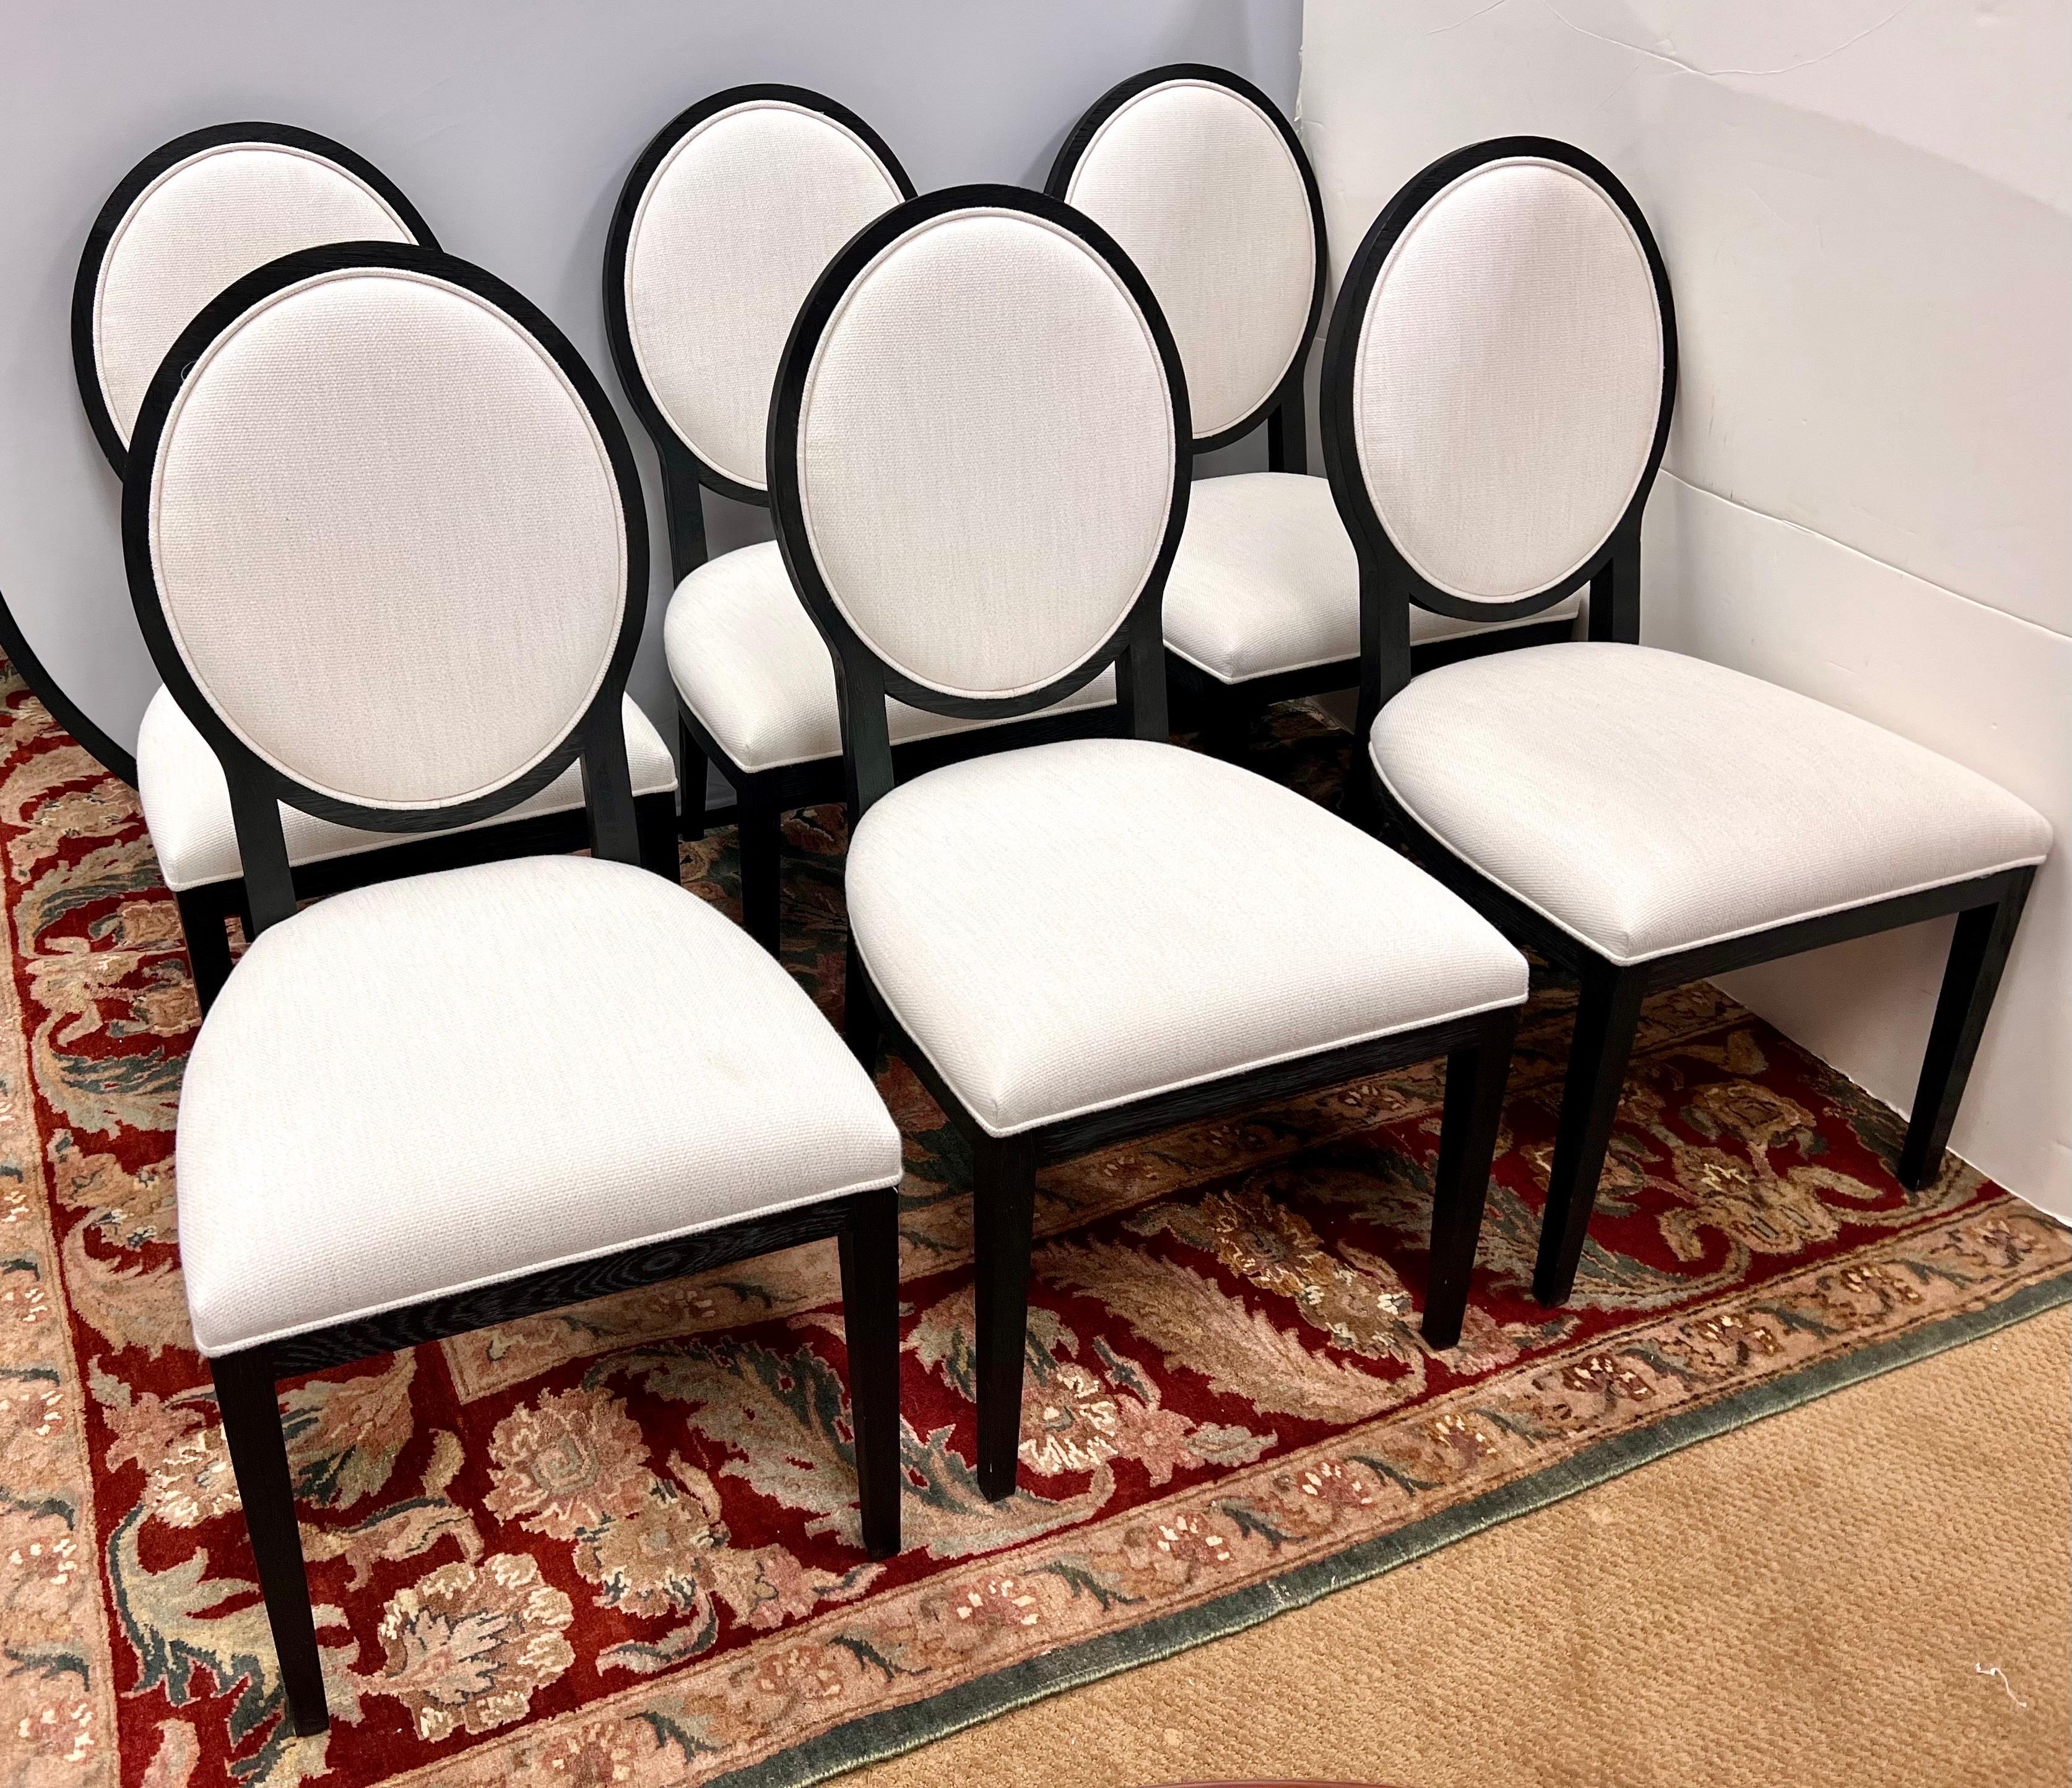 Elegant set of six Restoration Hardware linen upholstered oval back dining chairs.  A great addition to any style home.  We are based on the east coast and will work with you on shipping cost and logistics.  Again this is for the set of 6 shown (not